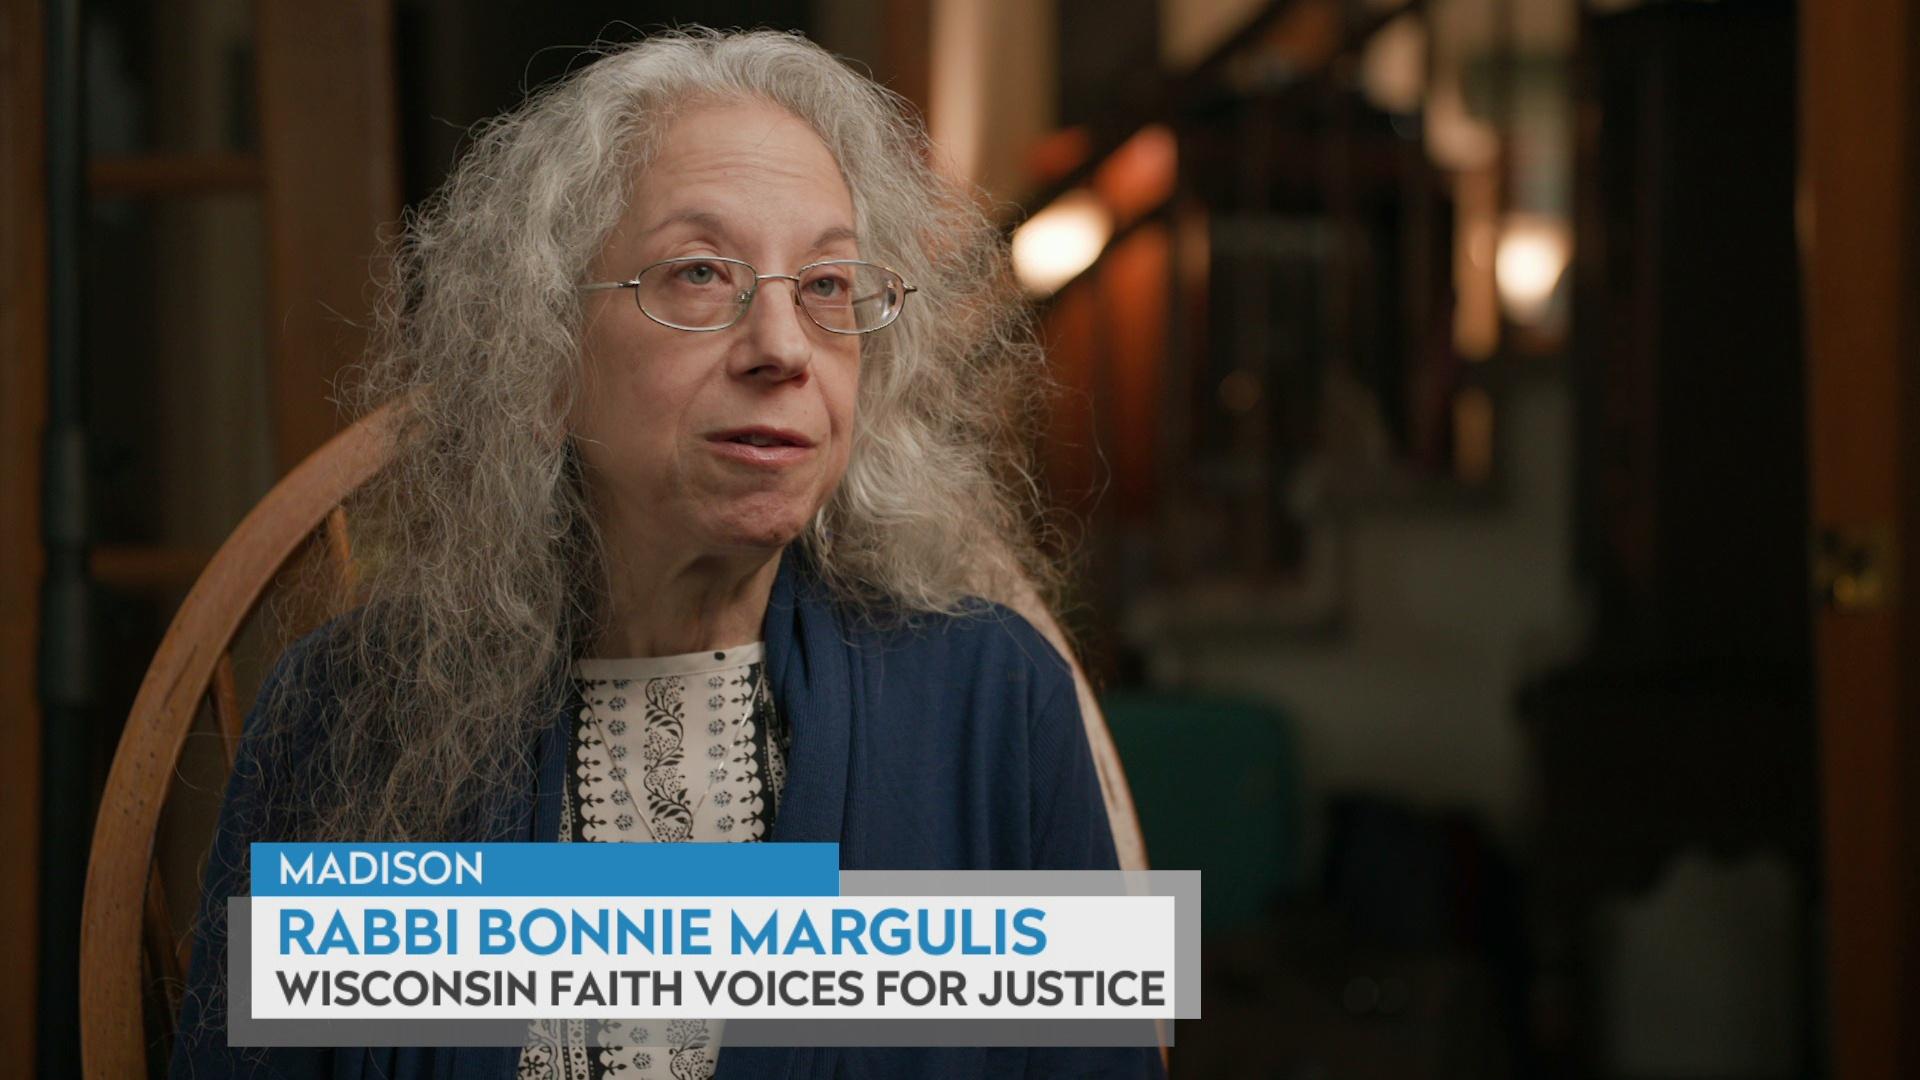 Bonnie Margulis sits on a chair with open double doors and a stairway in the background, with a graphic at bottom reading Madison, Rabbi Bonnie Margulis, and Wisconsin Faith Voices for Justice.